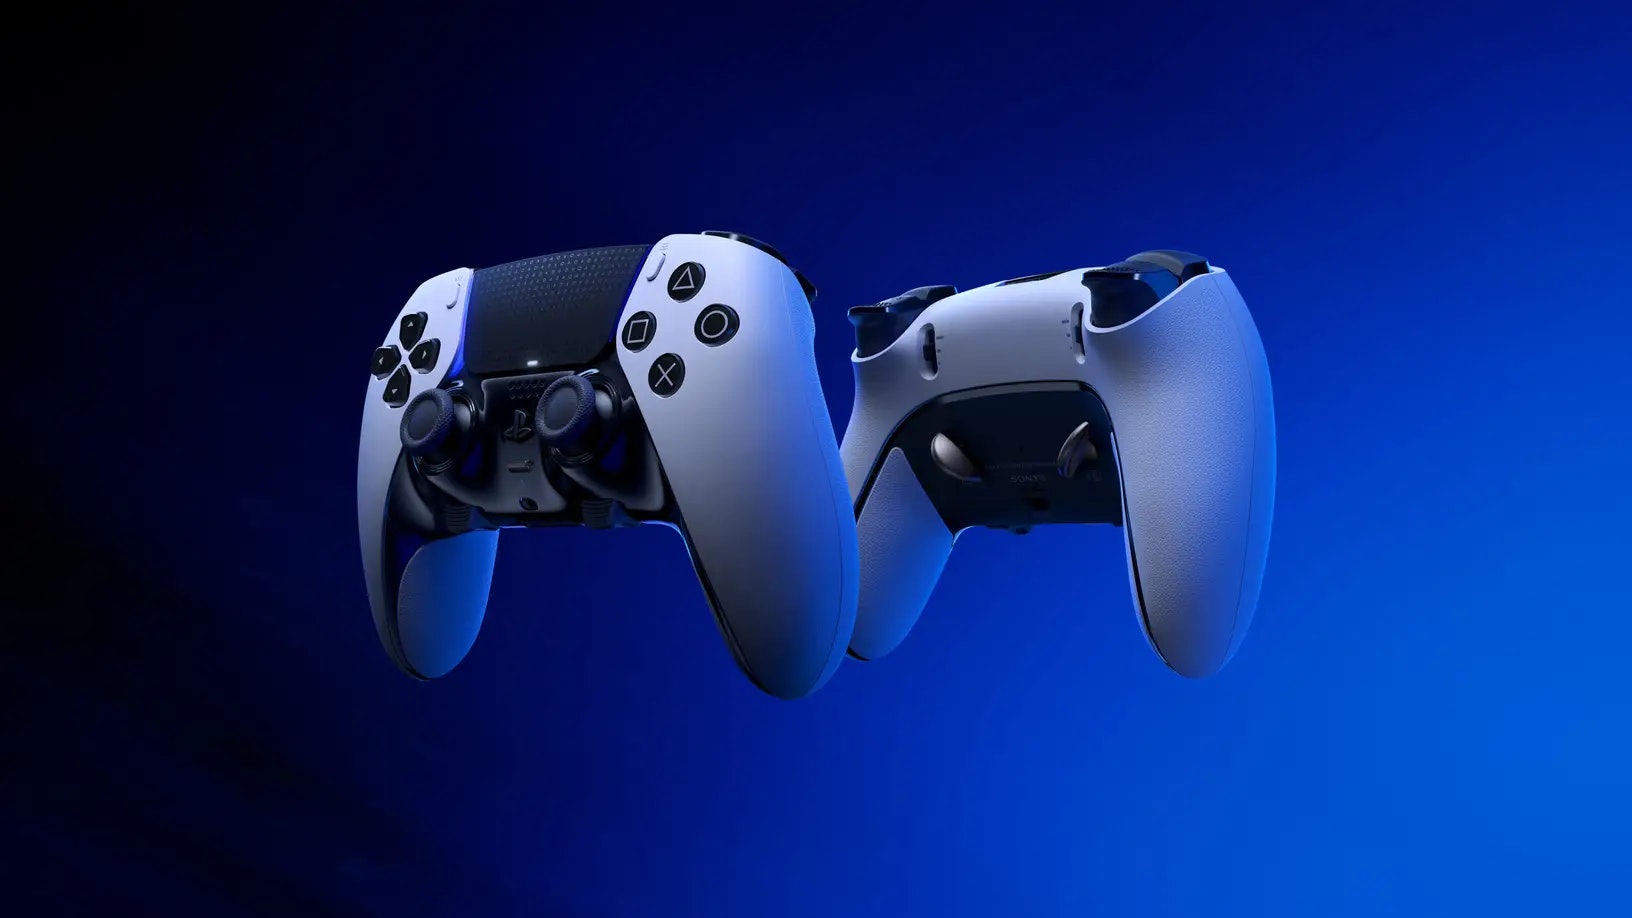 PS5 DualSense Edge controller release window, price, and features